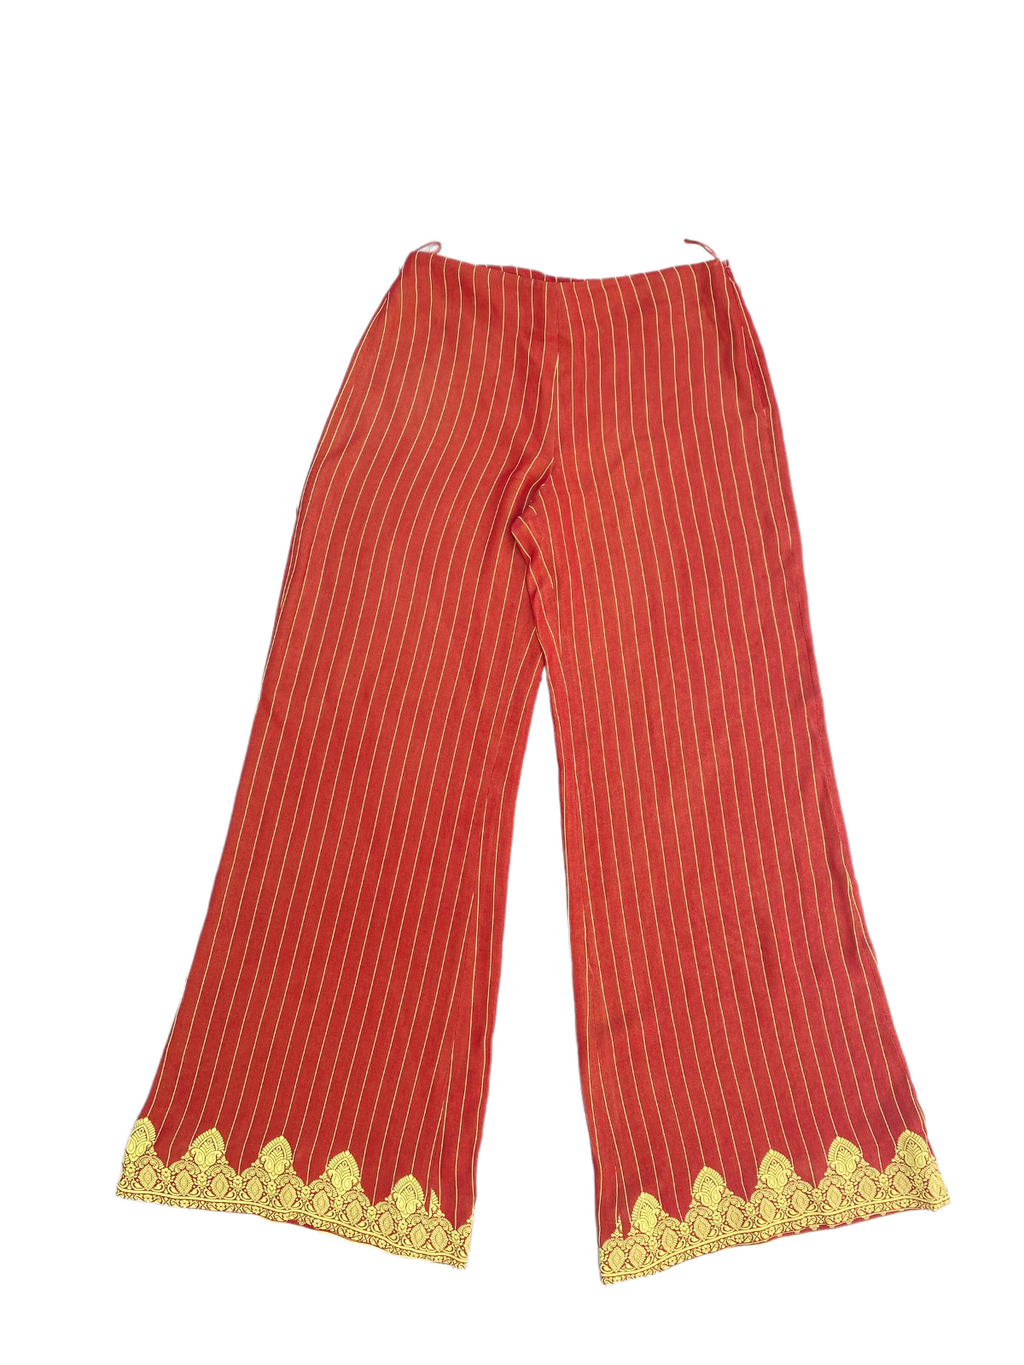 Vintage Striped Flare Red Pants